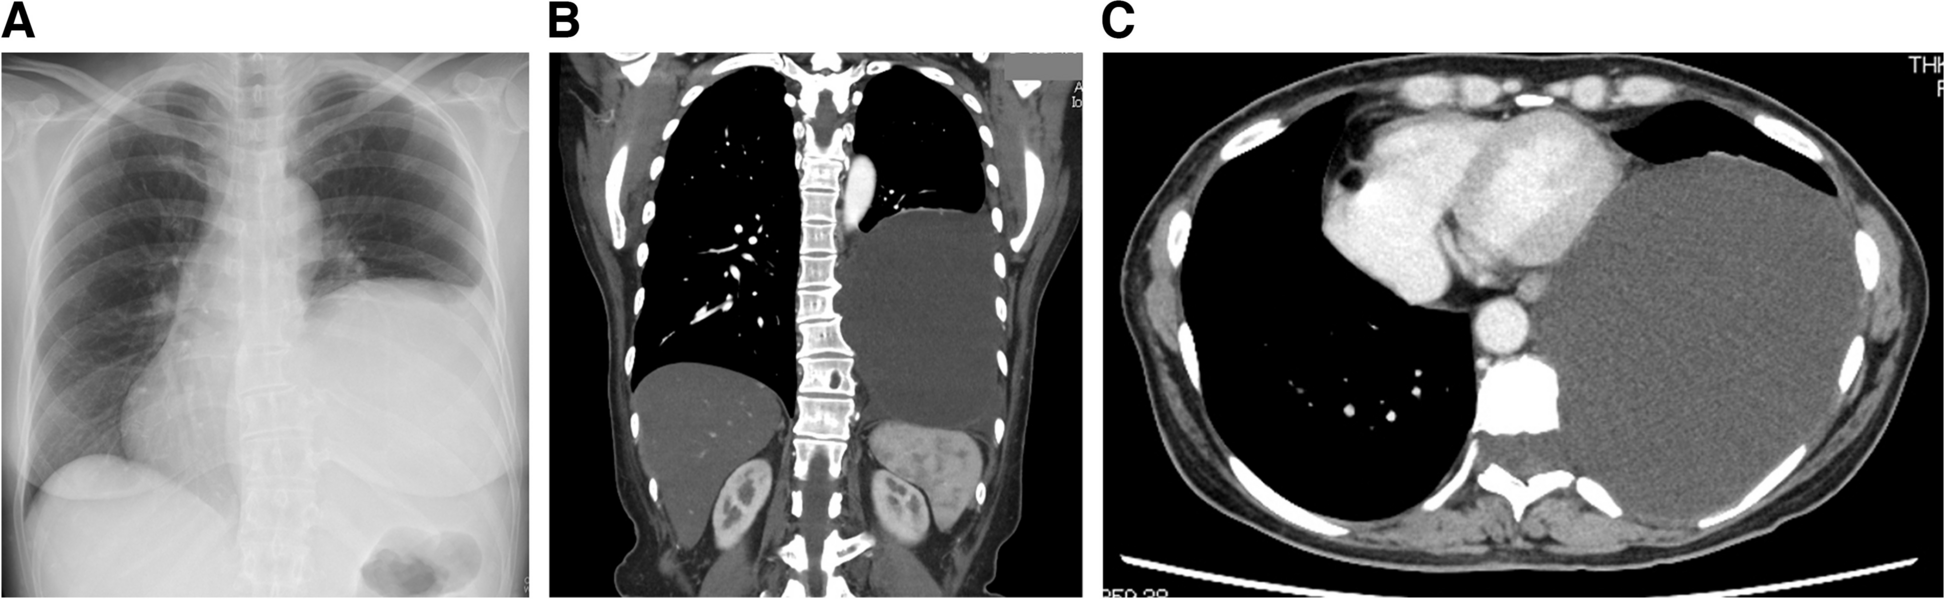 Anesthesia management for thoracoscopic resection of a huge intrathoracic meningocele: a case report